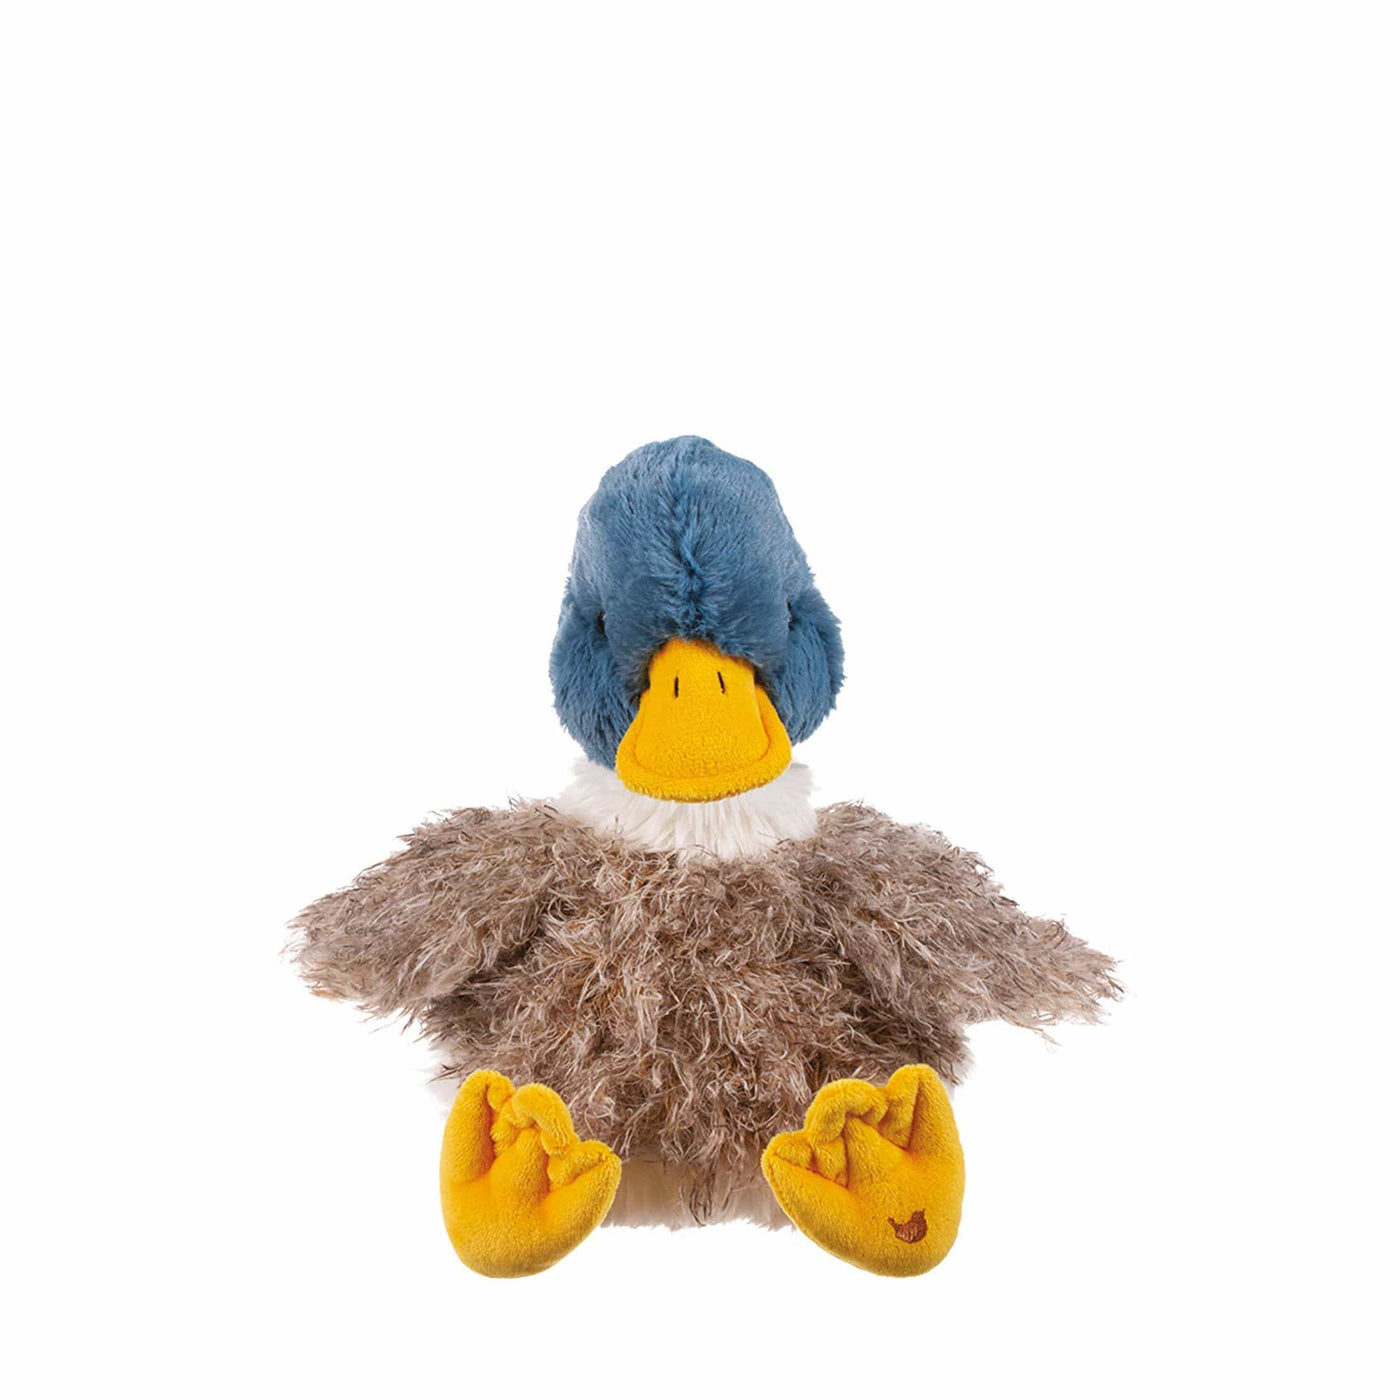 Wrendale Designs Childrens Toys and Games 'Webster' Duck Junior Plush Character - Choice Of Design